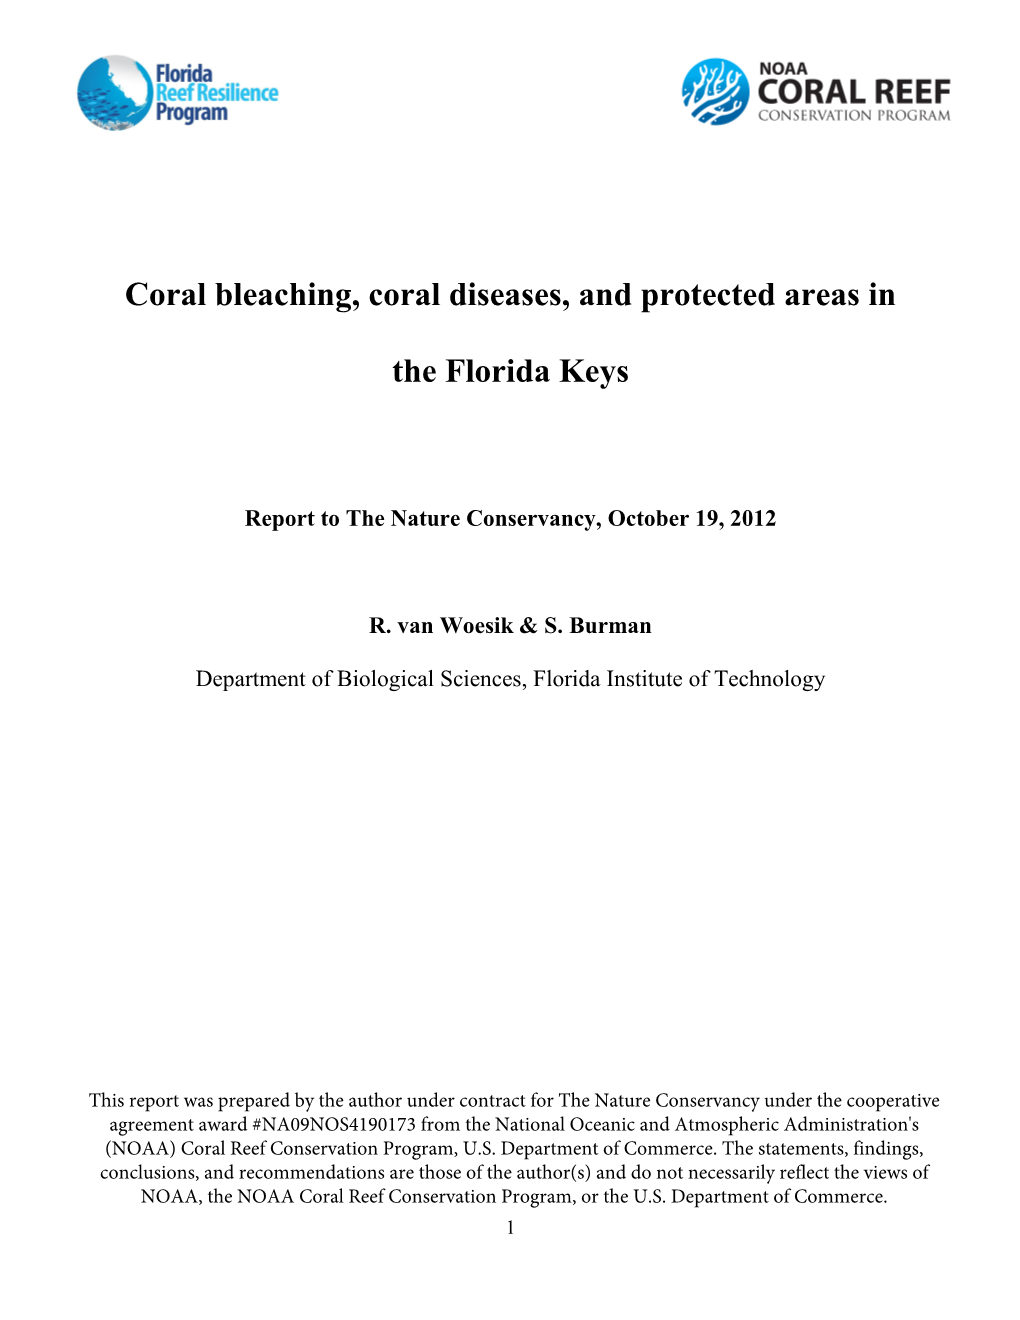 Coral Bleaching, Coral Diseases, and Protected Areas in the Florida Keys